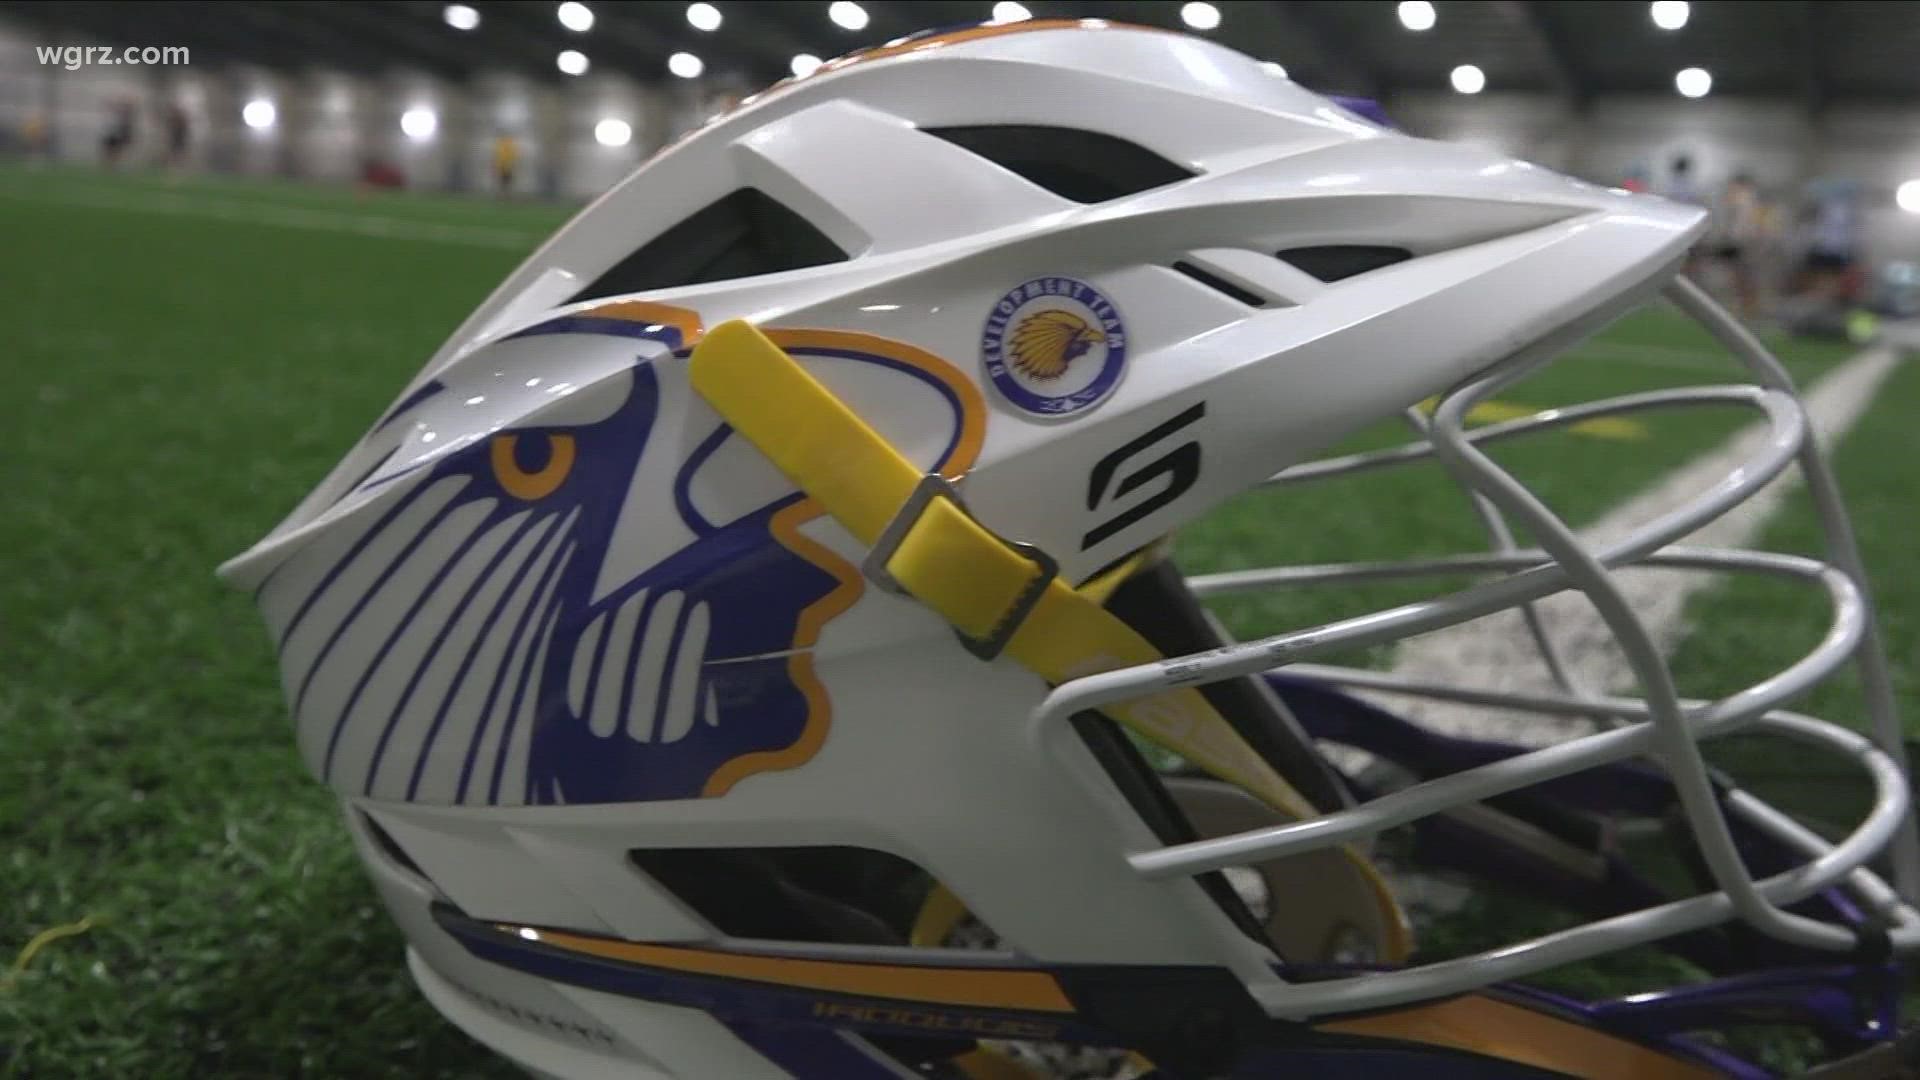 Facing financial and political hurdles, the Haudenosaunee Nationals plan to be ready if lacrosse returns to the Olympics at the 2028 Los Angeles games.